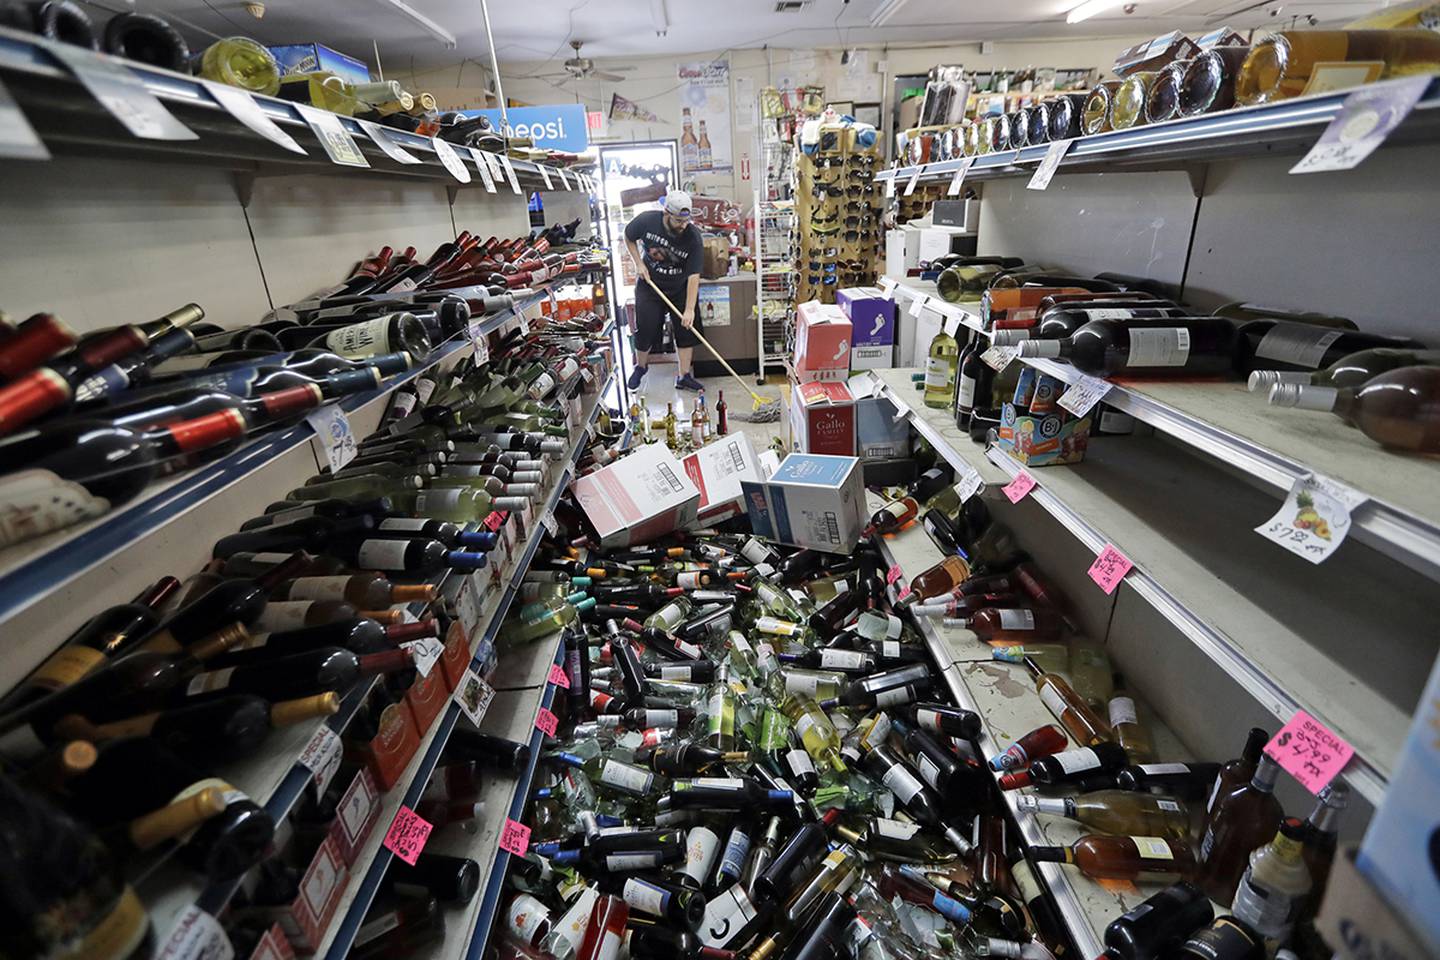 Bottles of wine are strewn in the middle of an aisle as Victor Abdullatif, background center, mops inside of the Eastridge Market, his family's store, Saturday, July 6, 2019, in Ridgecrest, Calif.